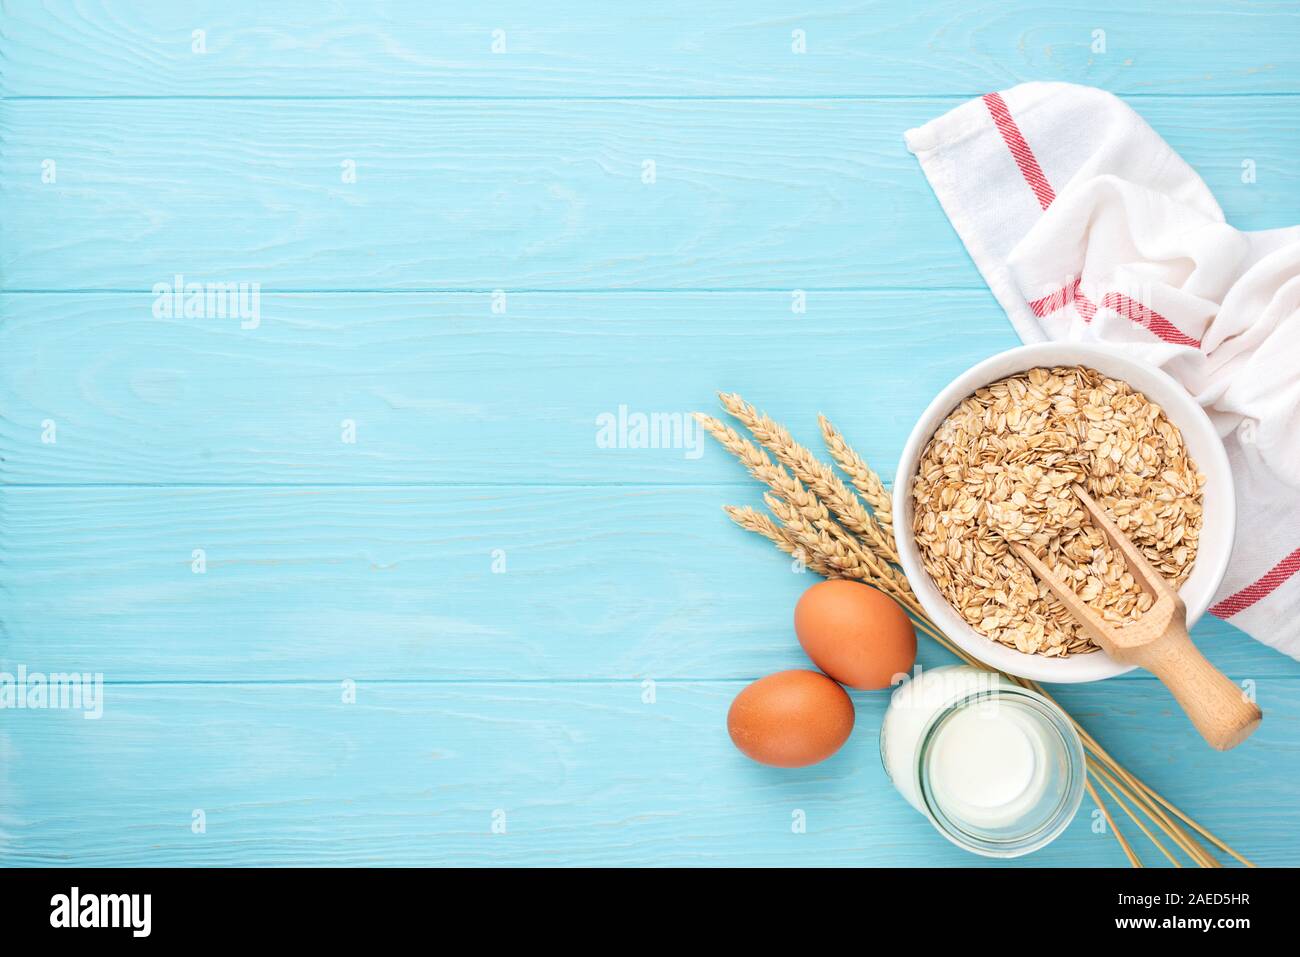 Rolled oats, bottle of milk and eggs - healthy breakfast food concept. On blue wooden table background. Copy space for text Stock Photo